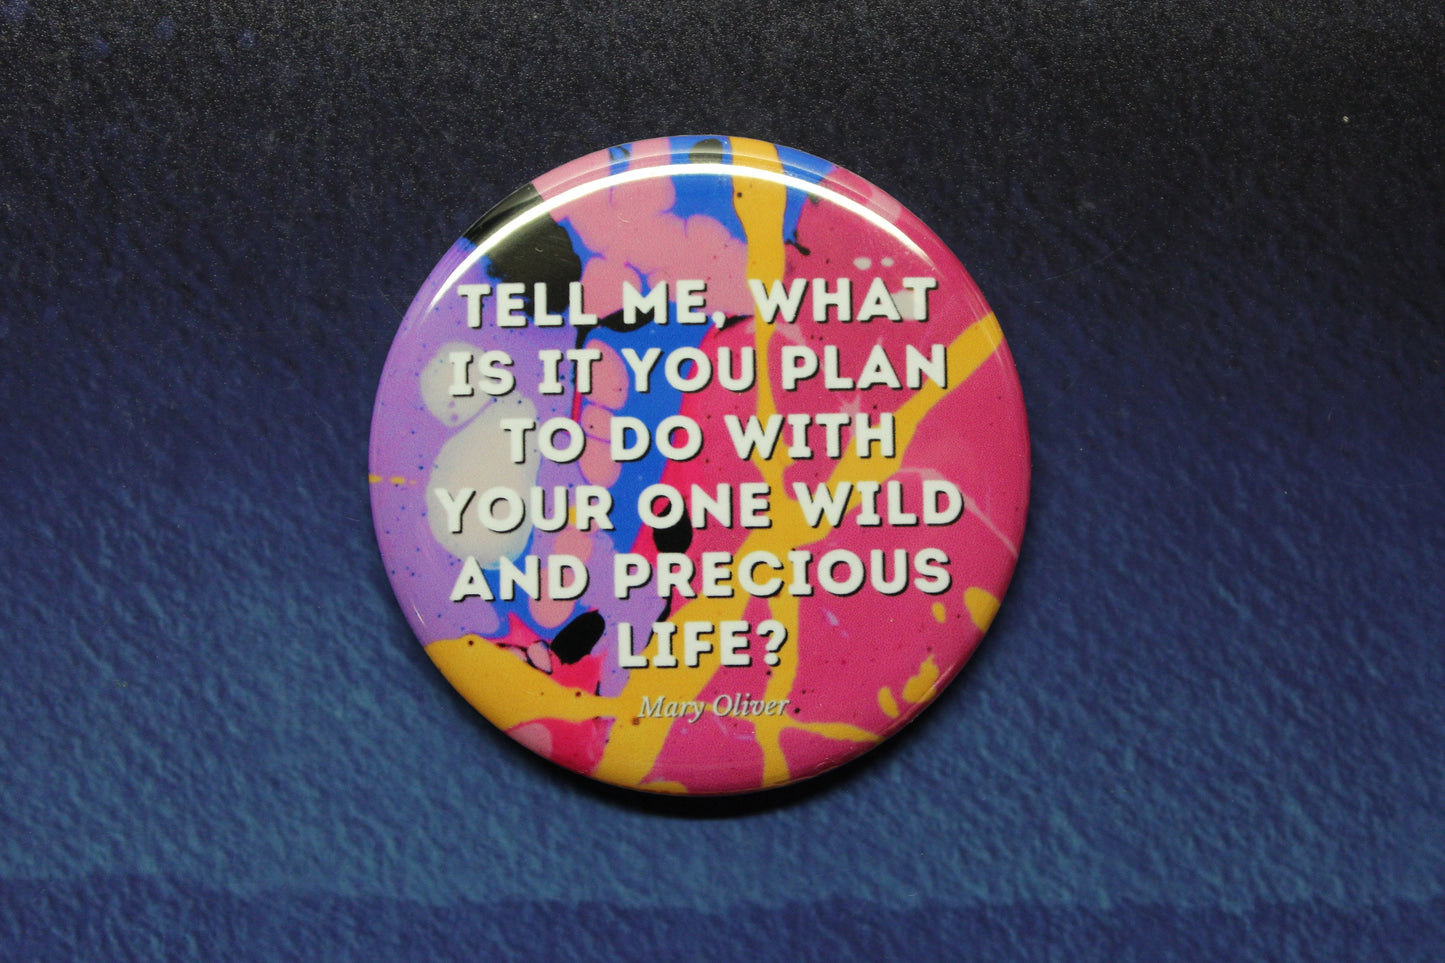 Your One Wild And Precious Life Mary Oliver Button Magnet or Bottle Opener